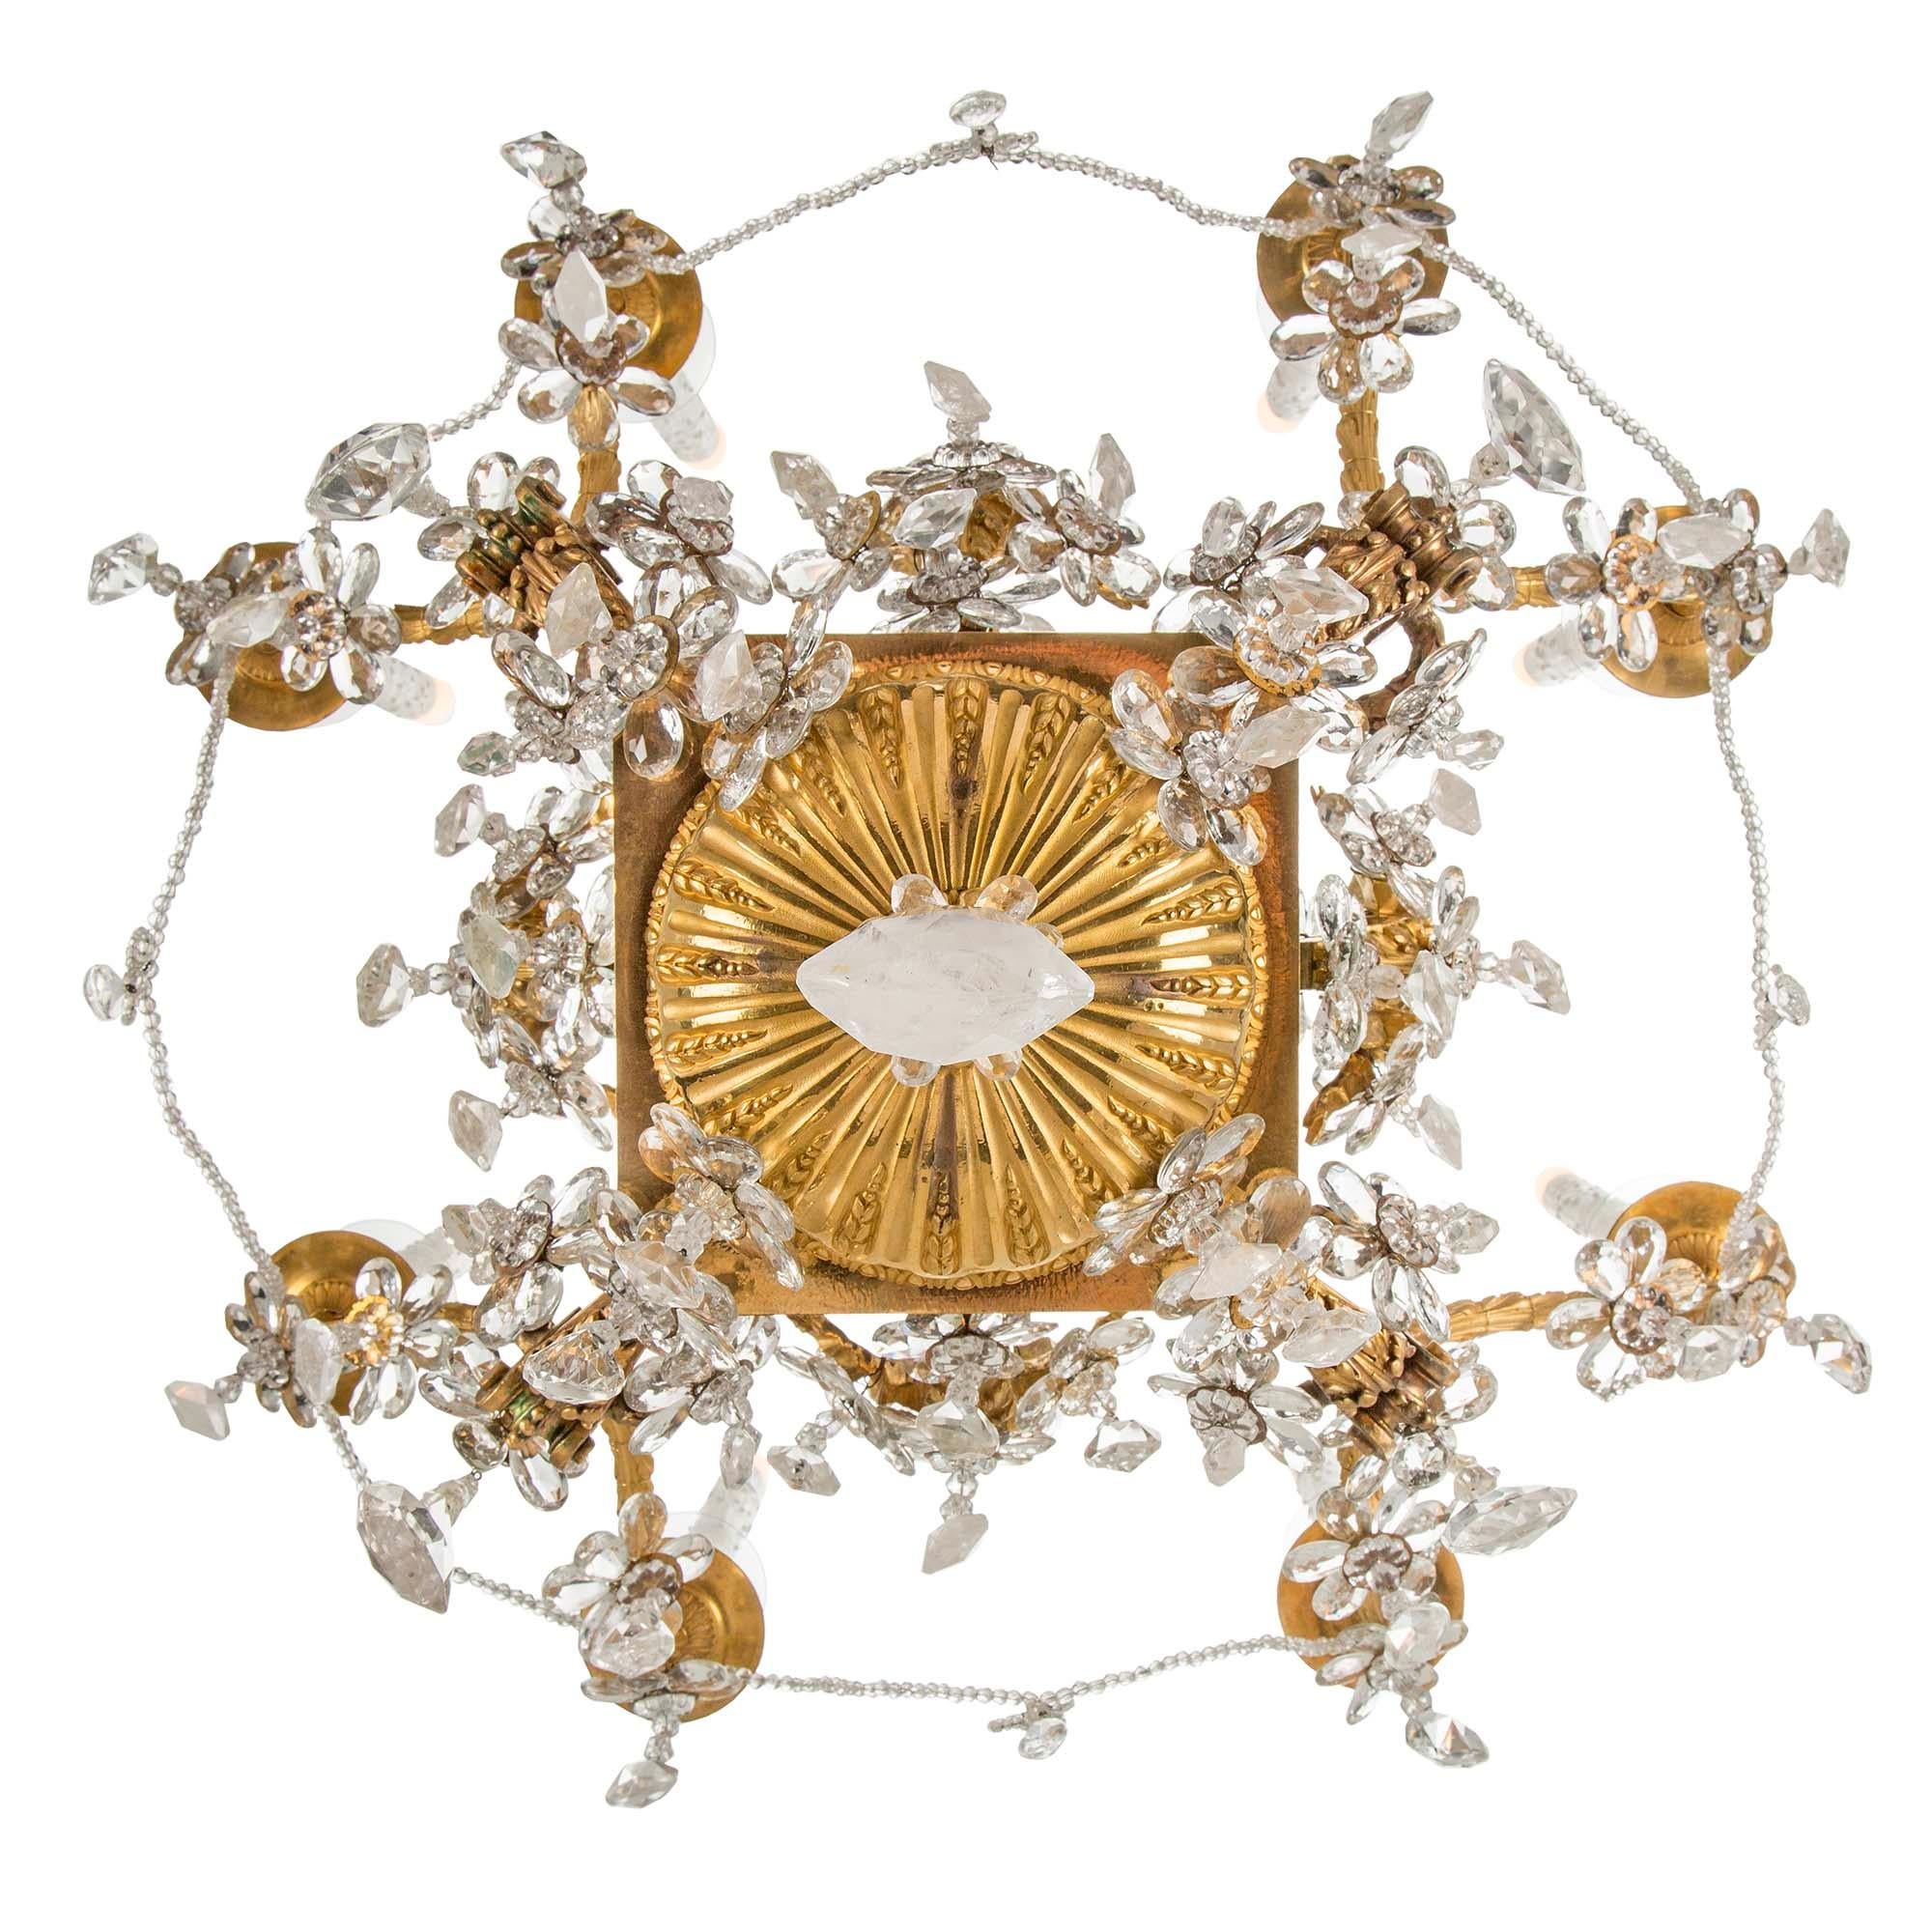  French Early 19th Century Louis XVI Style Eight-Arm Chandelier For Sale 2